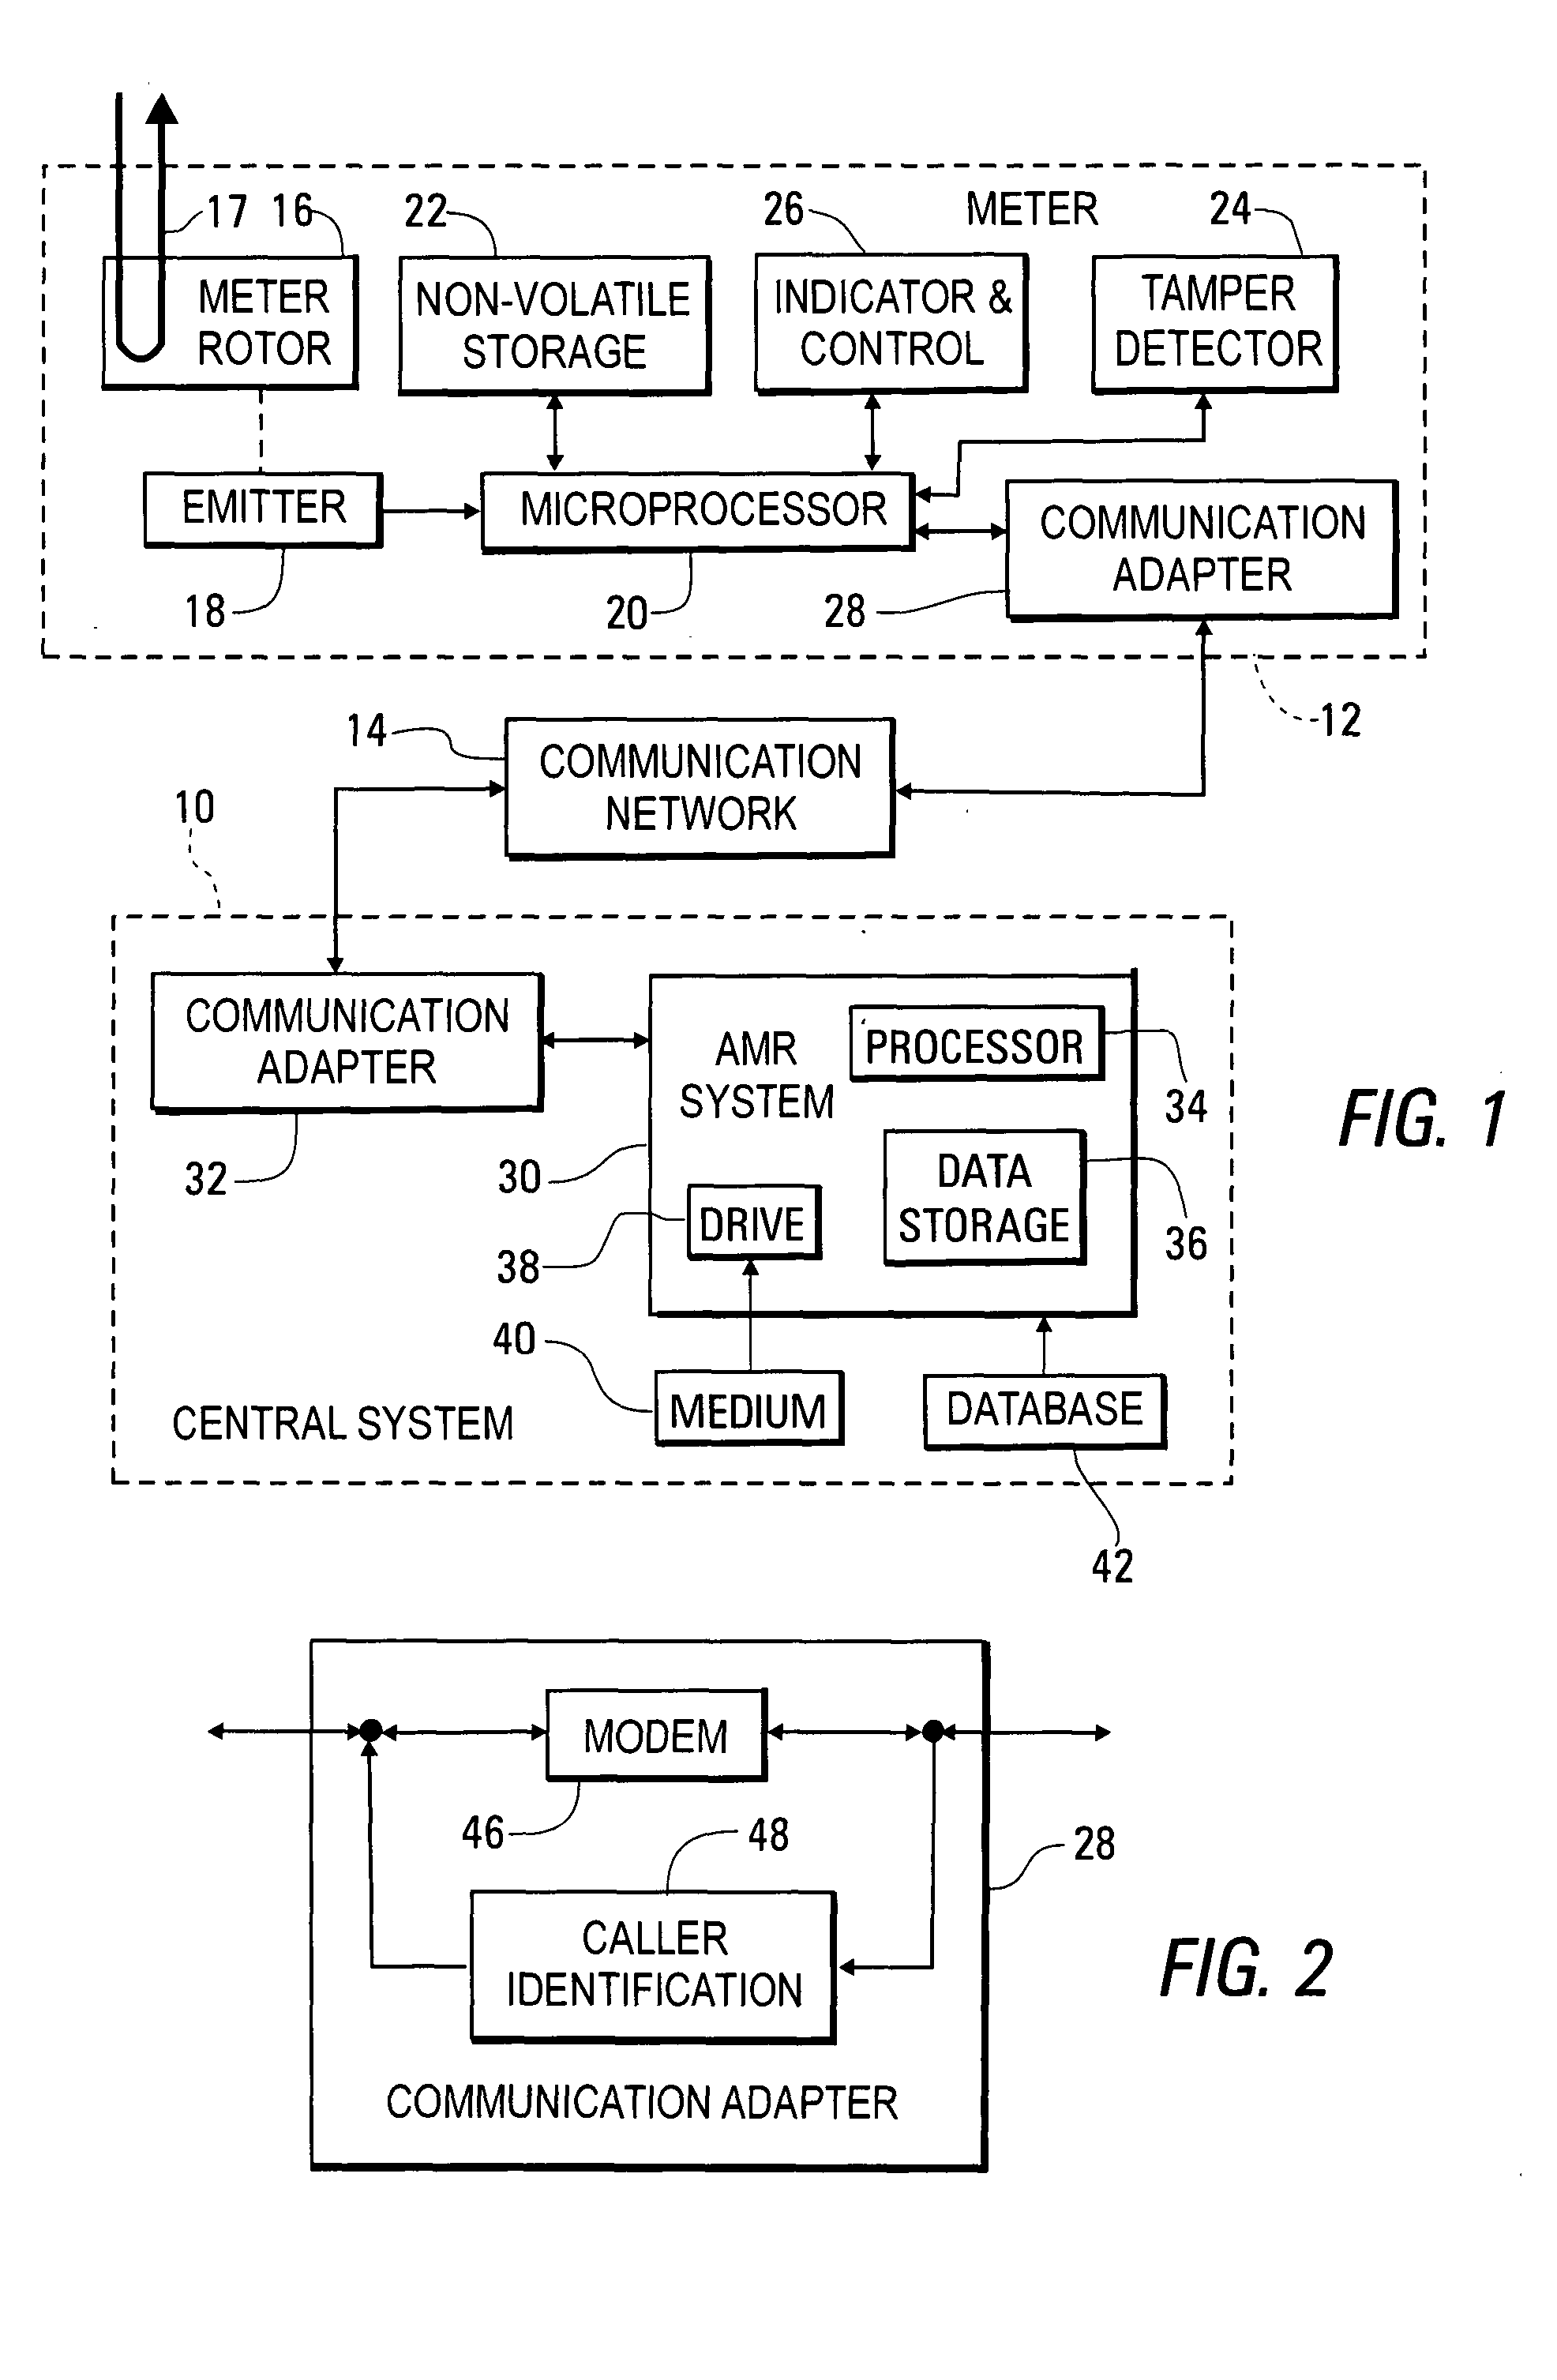 System and method for verifying the identity of a remote meter transmitting utility usage data